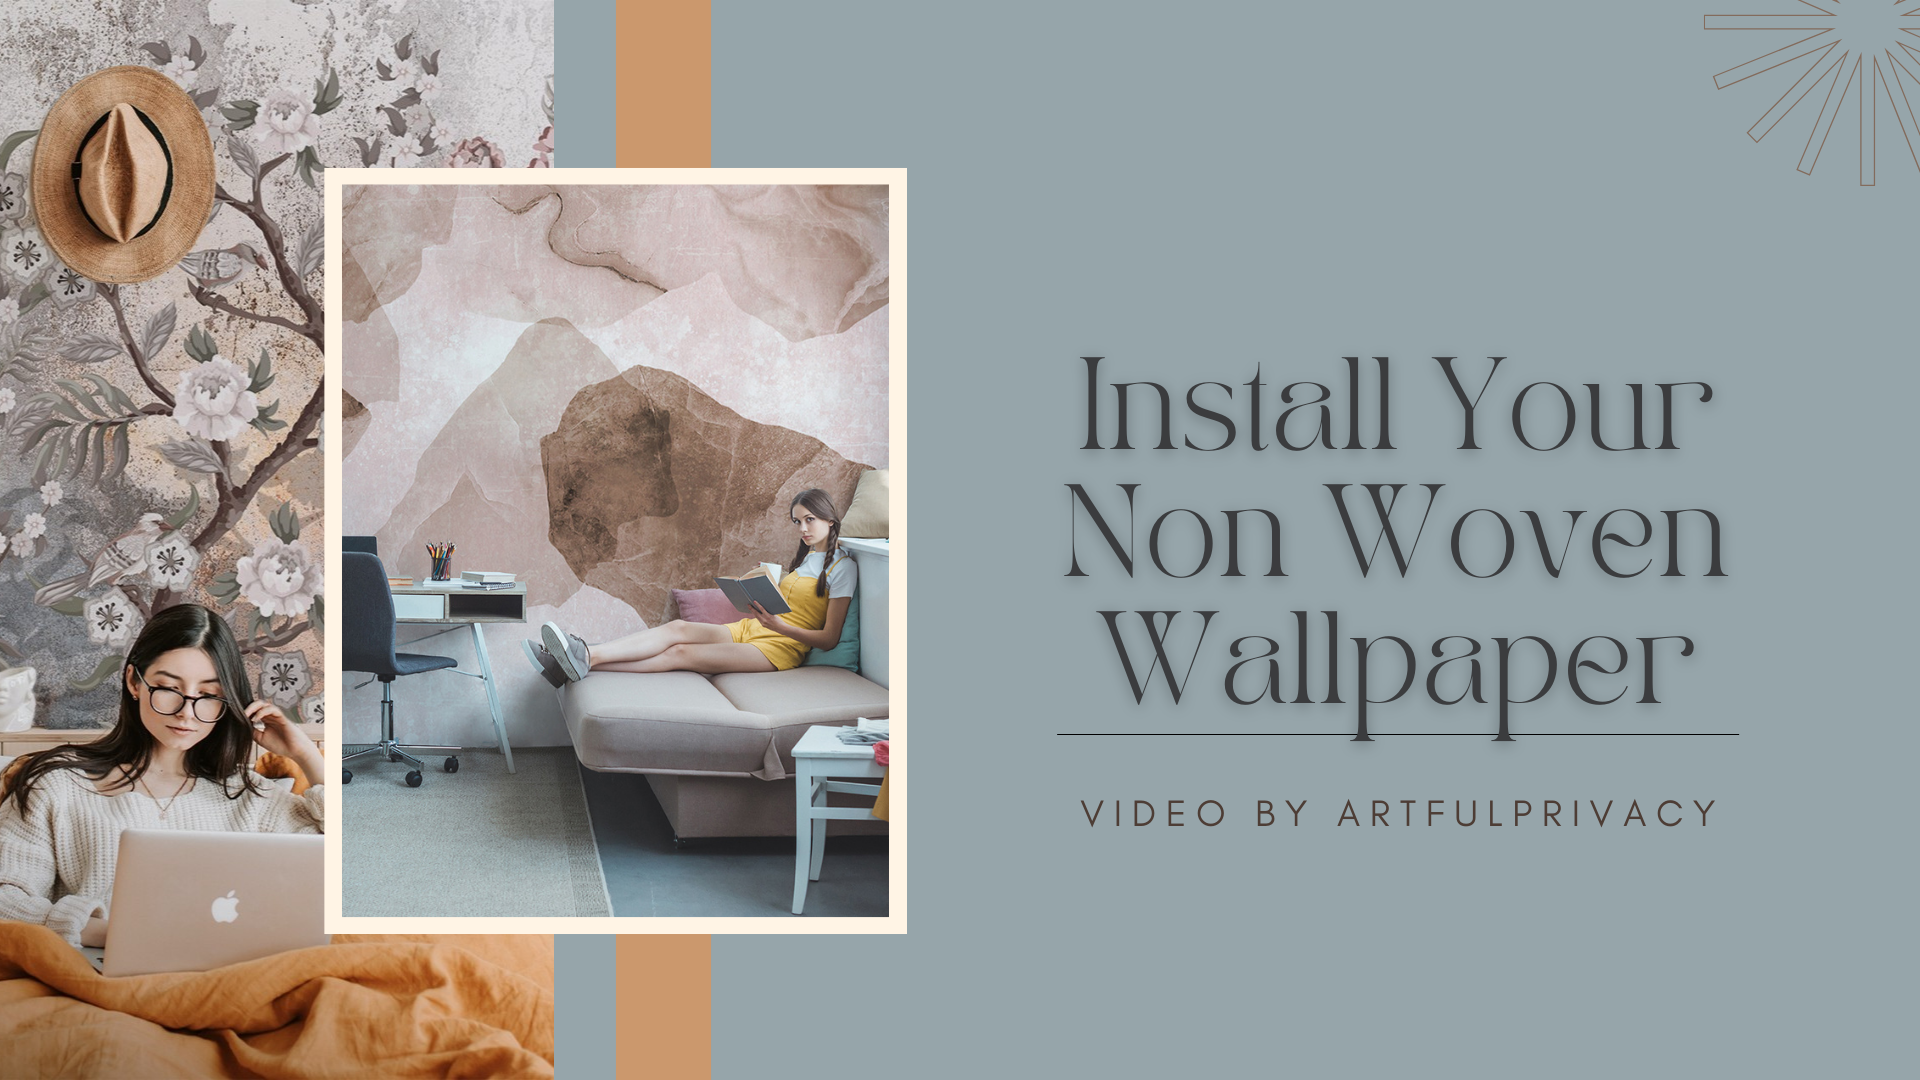 Load video: non woven wall mural intallation